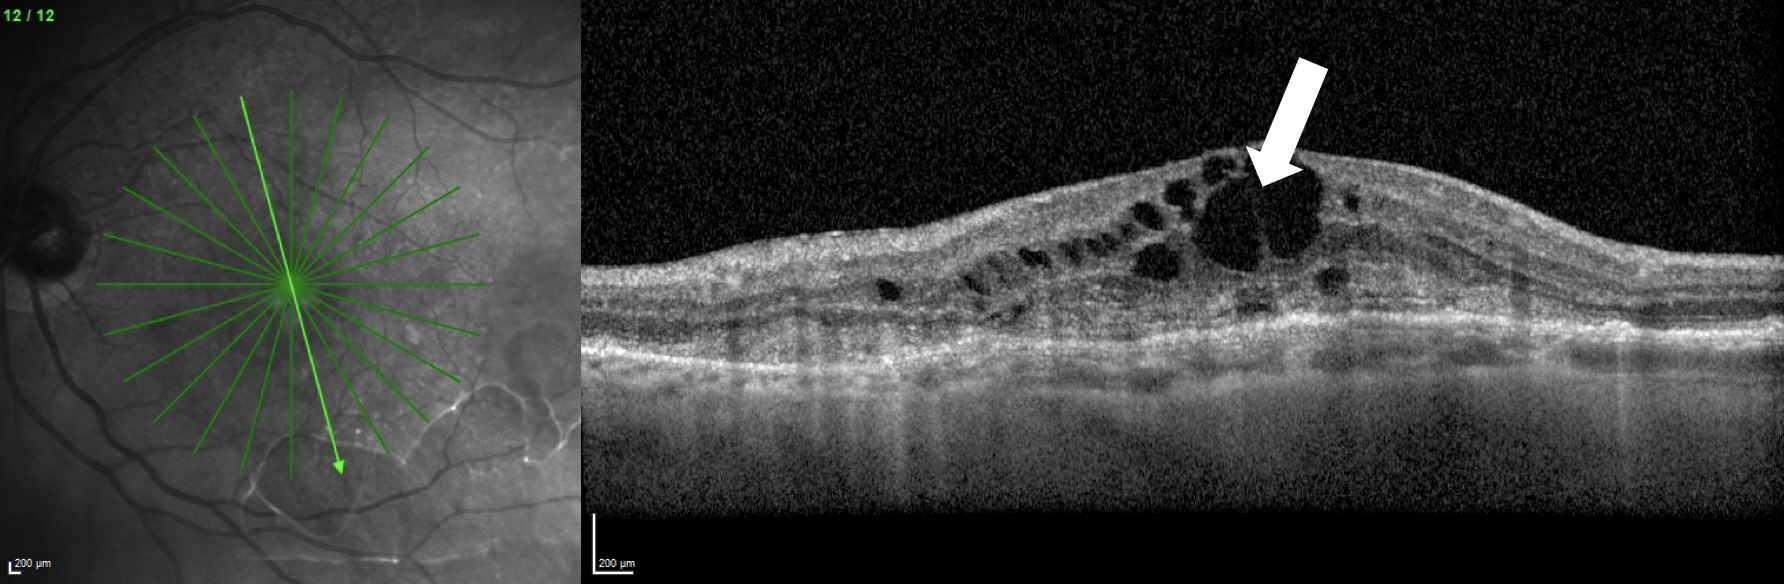 Intraretinal fluid (white arrow), shown here in a patient with macular neovascularization, was one of the areas of widest disagreement among the experts who assessed OCT scans in the trial.